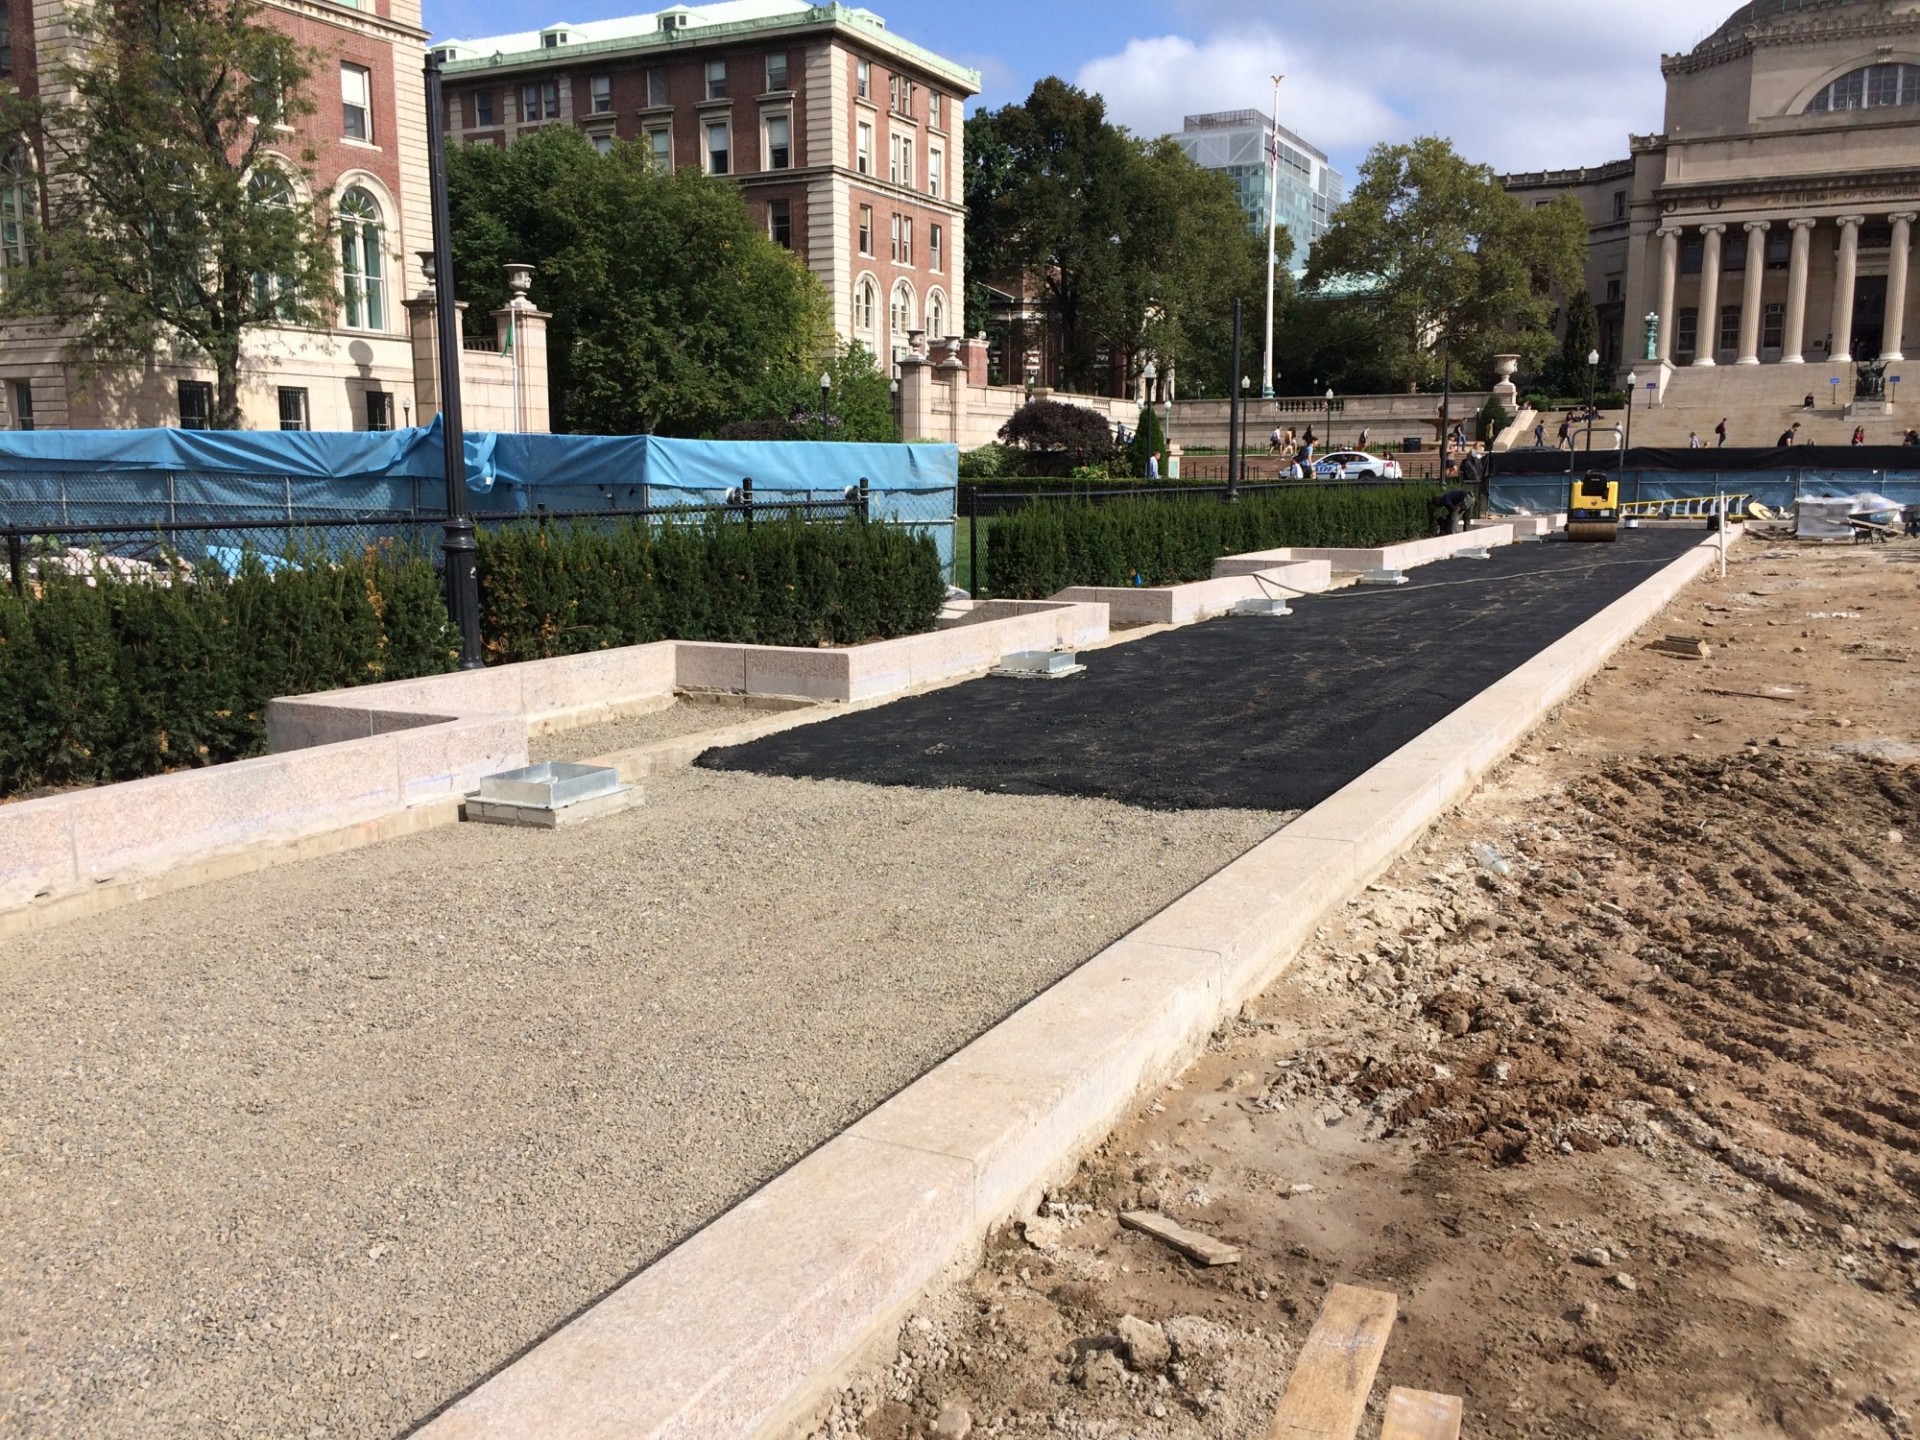 Asphalt sub-layer of the west walkway being installed over the stone sub-layer. (Photo from September 19, 2017)